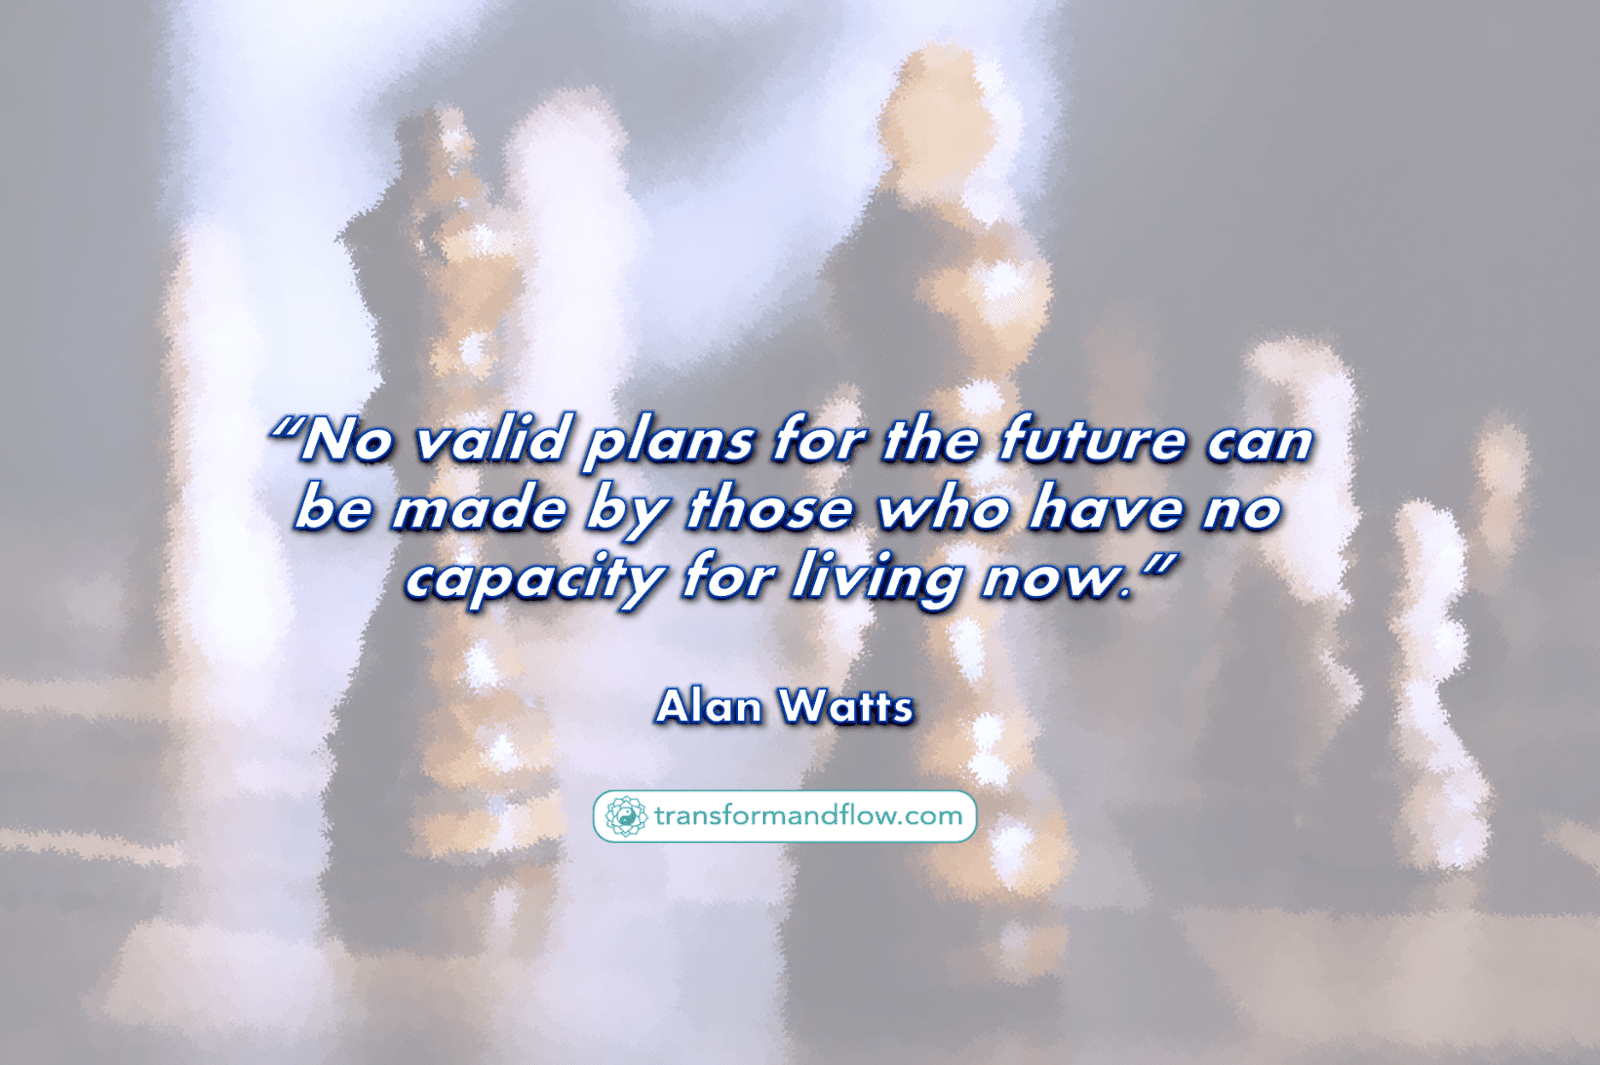 No valid plans for the future can be made by those who have no capacity for living now. Alan Watts